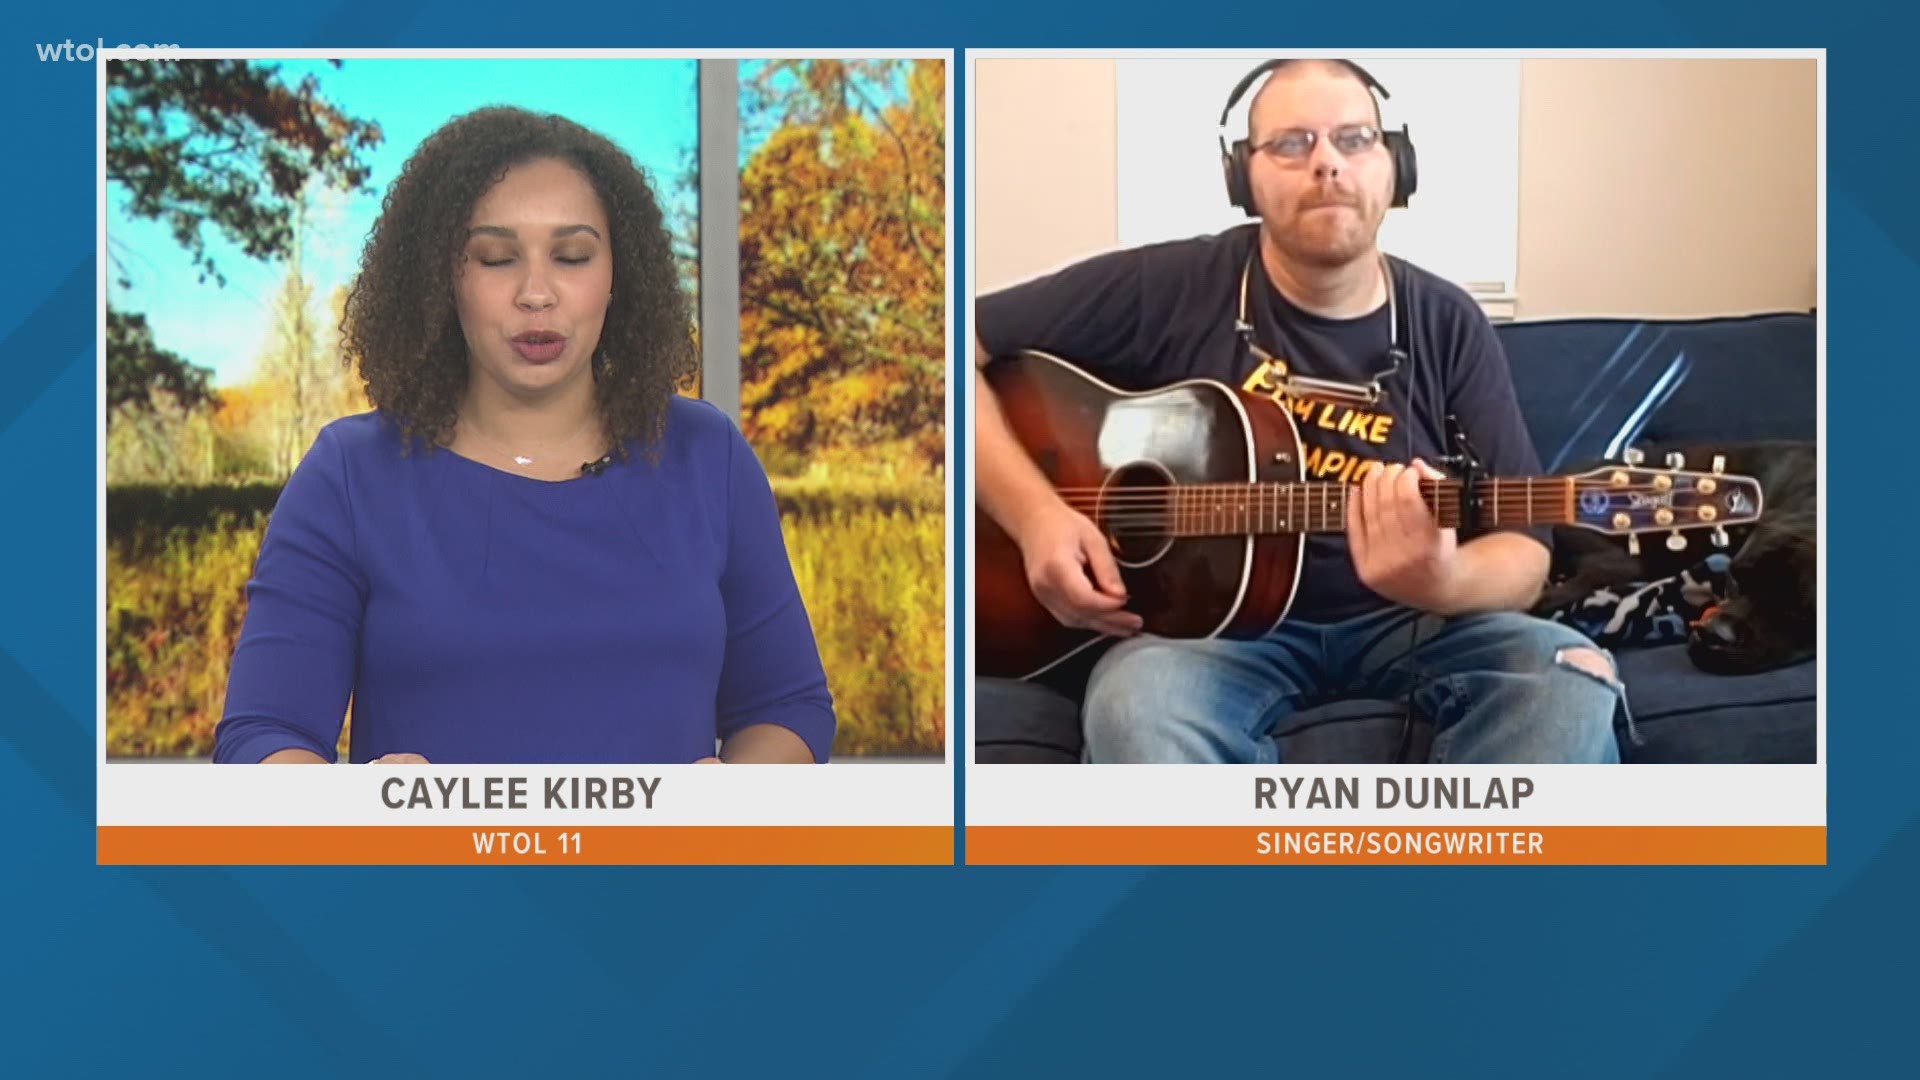 Toledo-area singer and songwriter, Ryan Dunlap, tells us how he has been performing and sharing this music during the pandemic. He also shows us his new single.